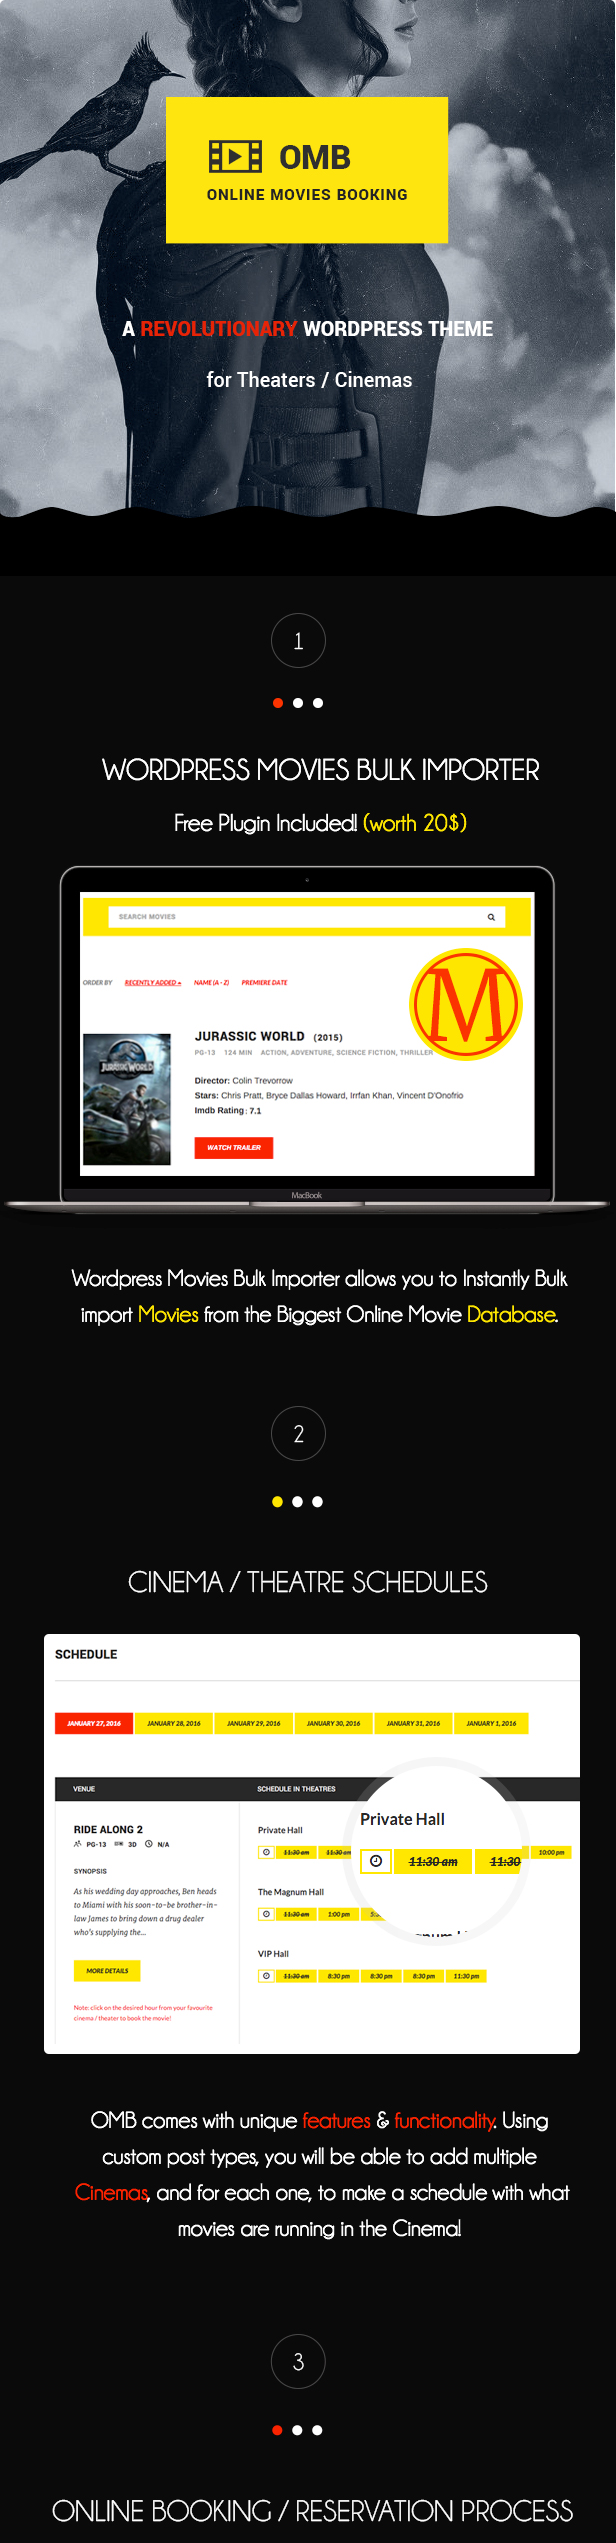 OMB - Online Movies Booking  - 3